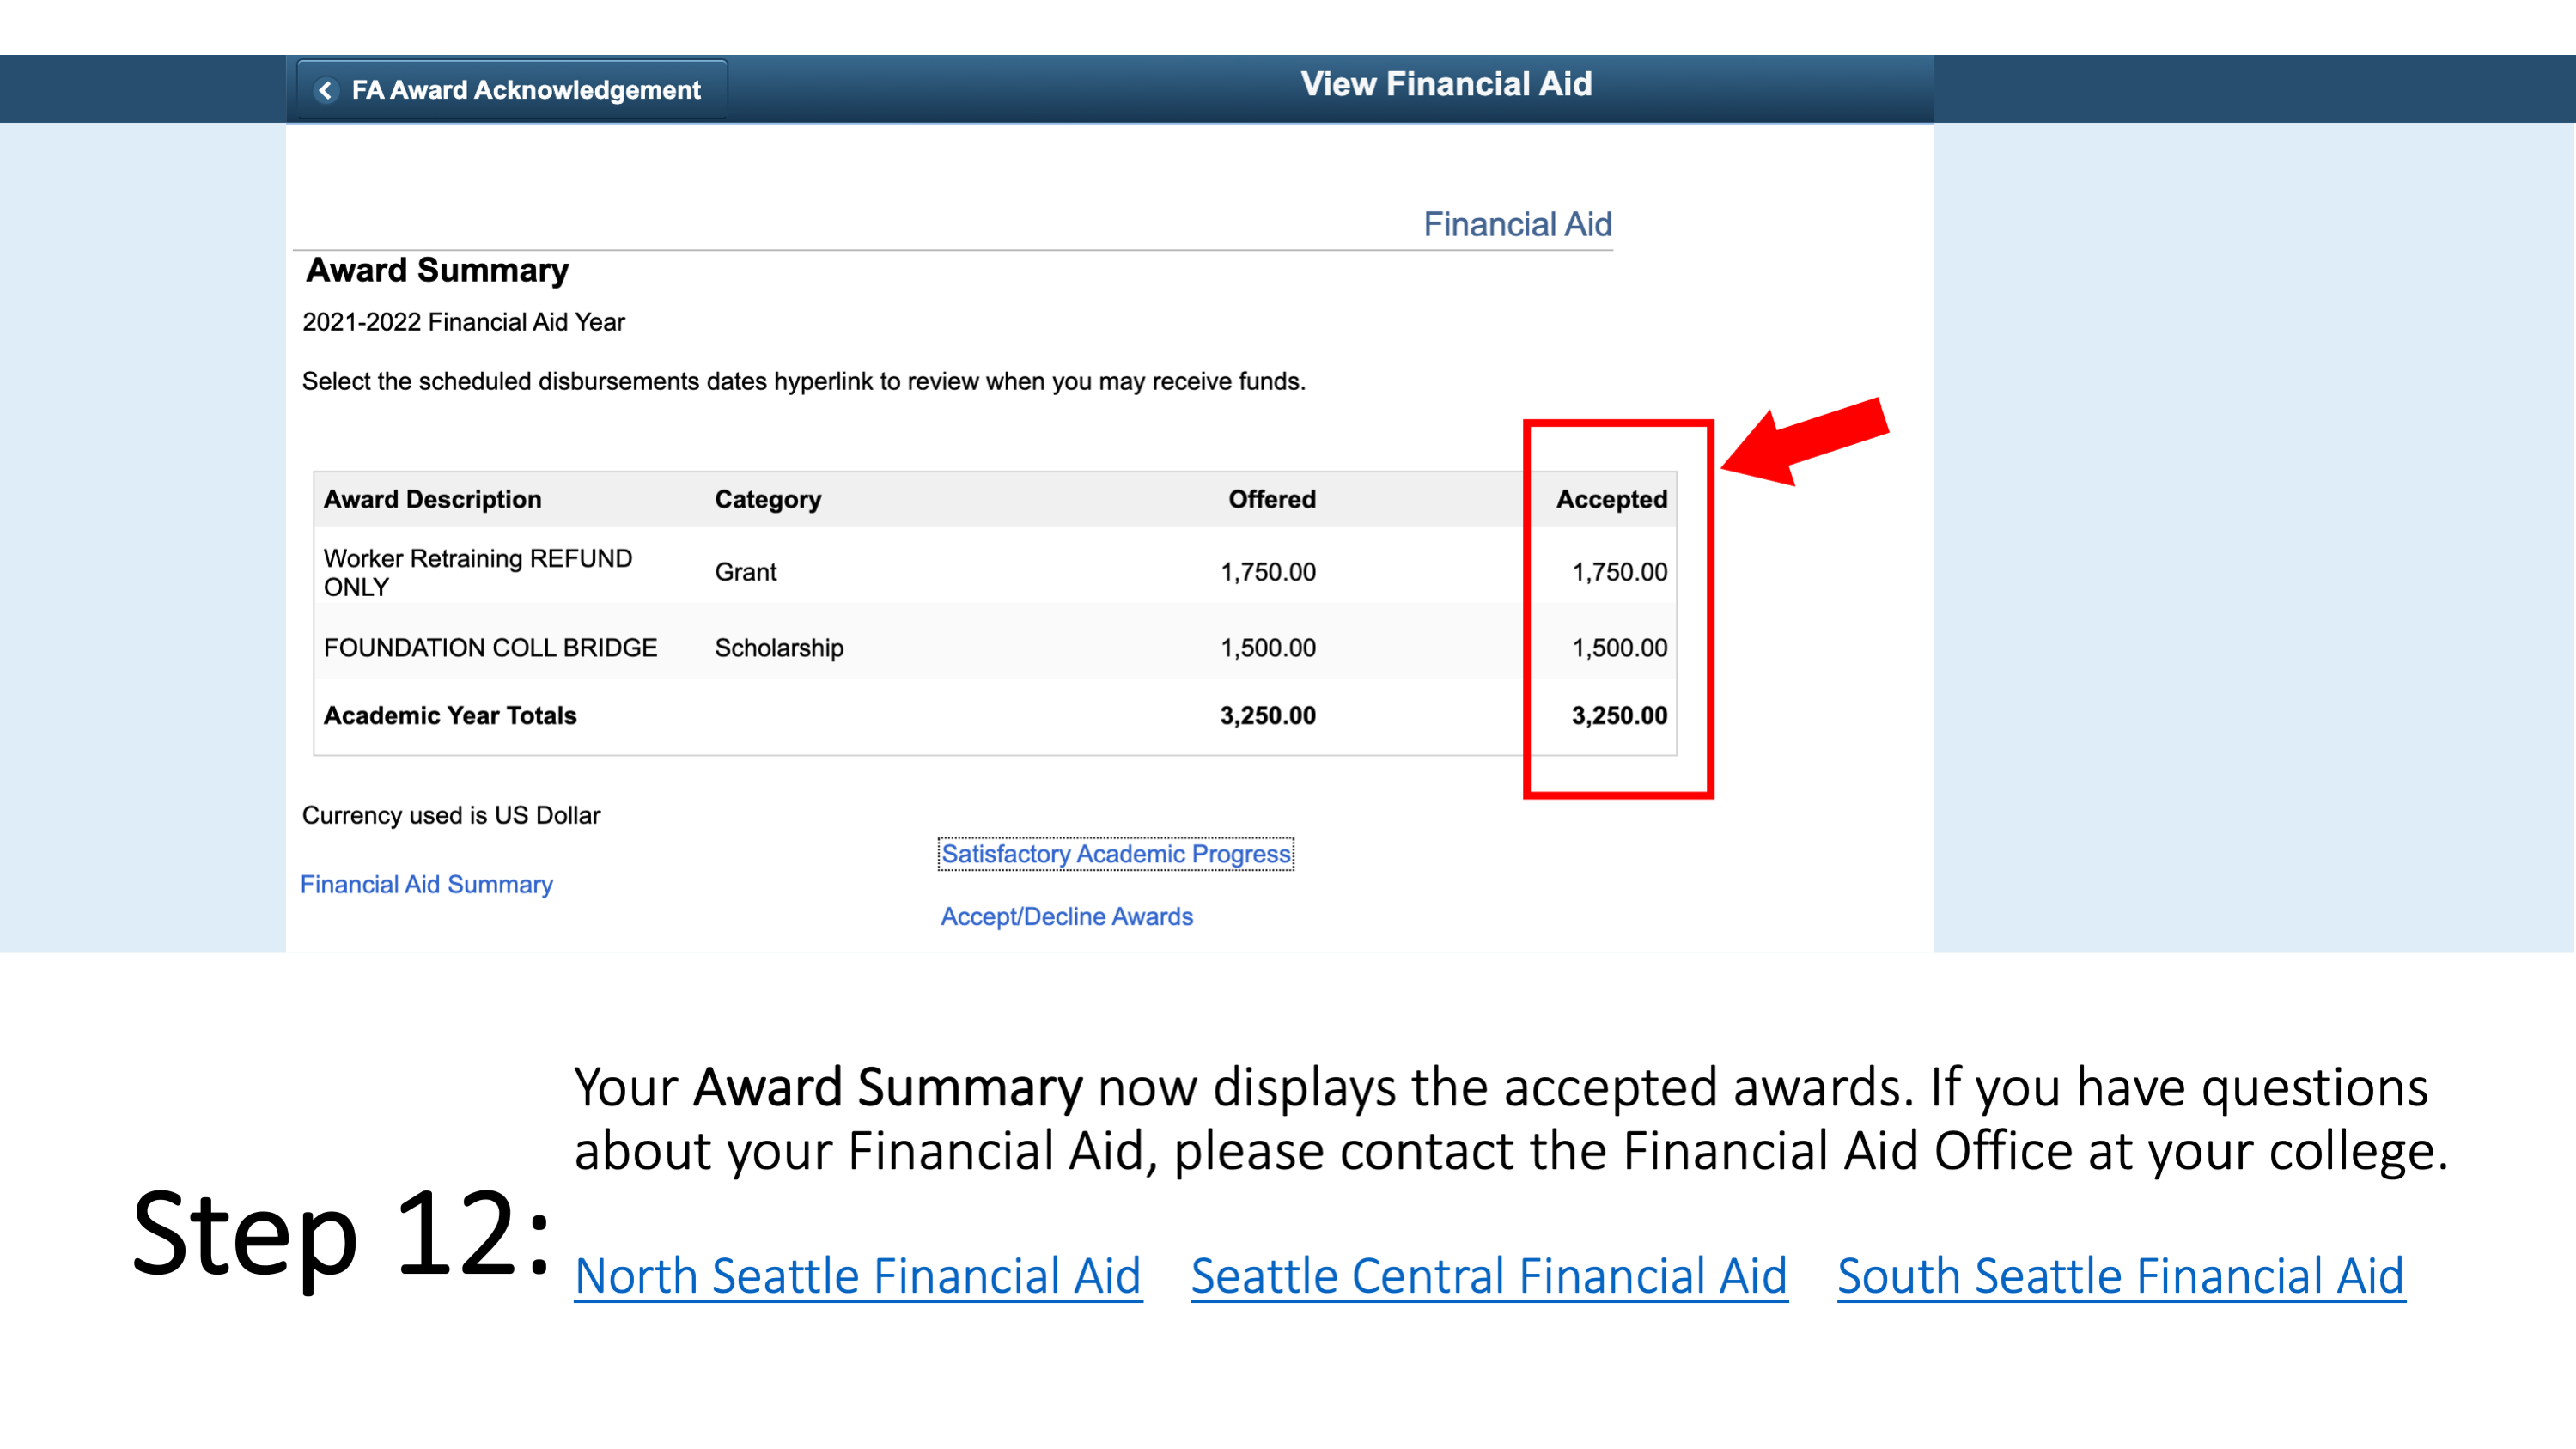 Step 12: Your Award Summary now displays the accepted awards. If you have questions about your Financial Aid, please contact the Financial Aid Office at your college. North Seattle Financial Aid, Seattle Central Financial Aid, South Seattle Financial Aid.